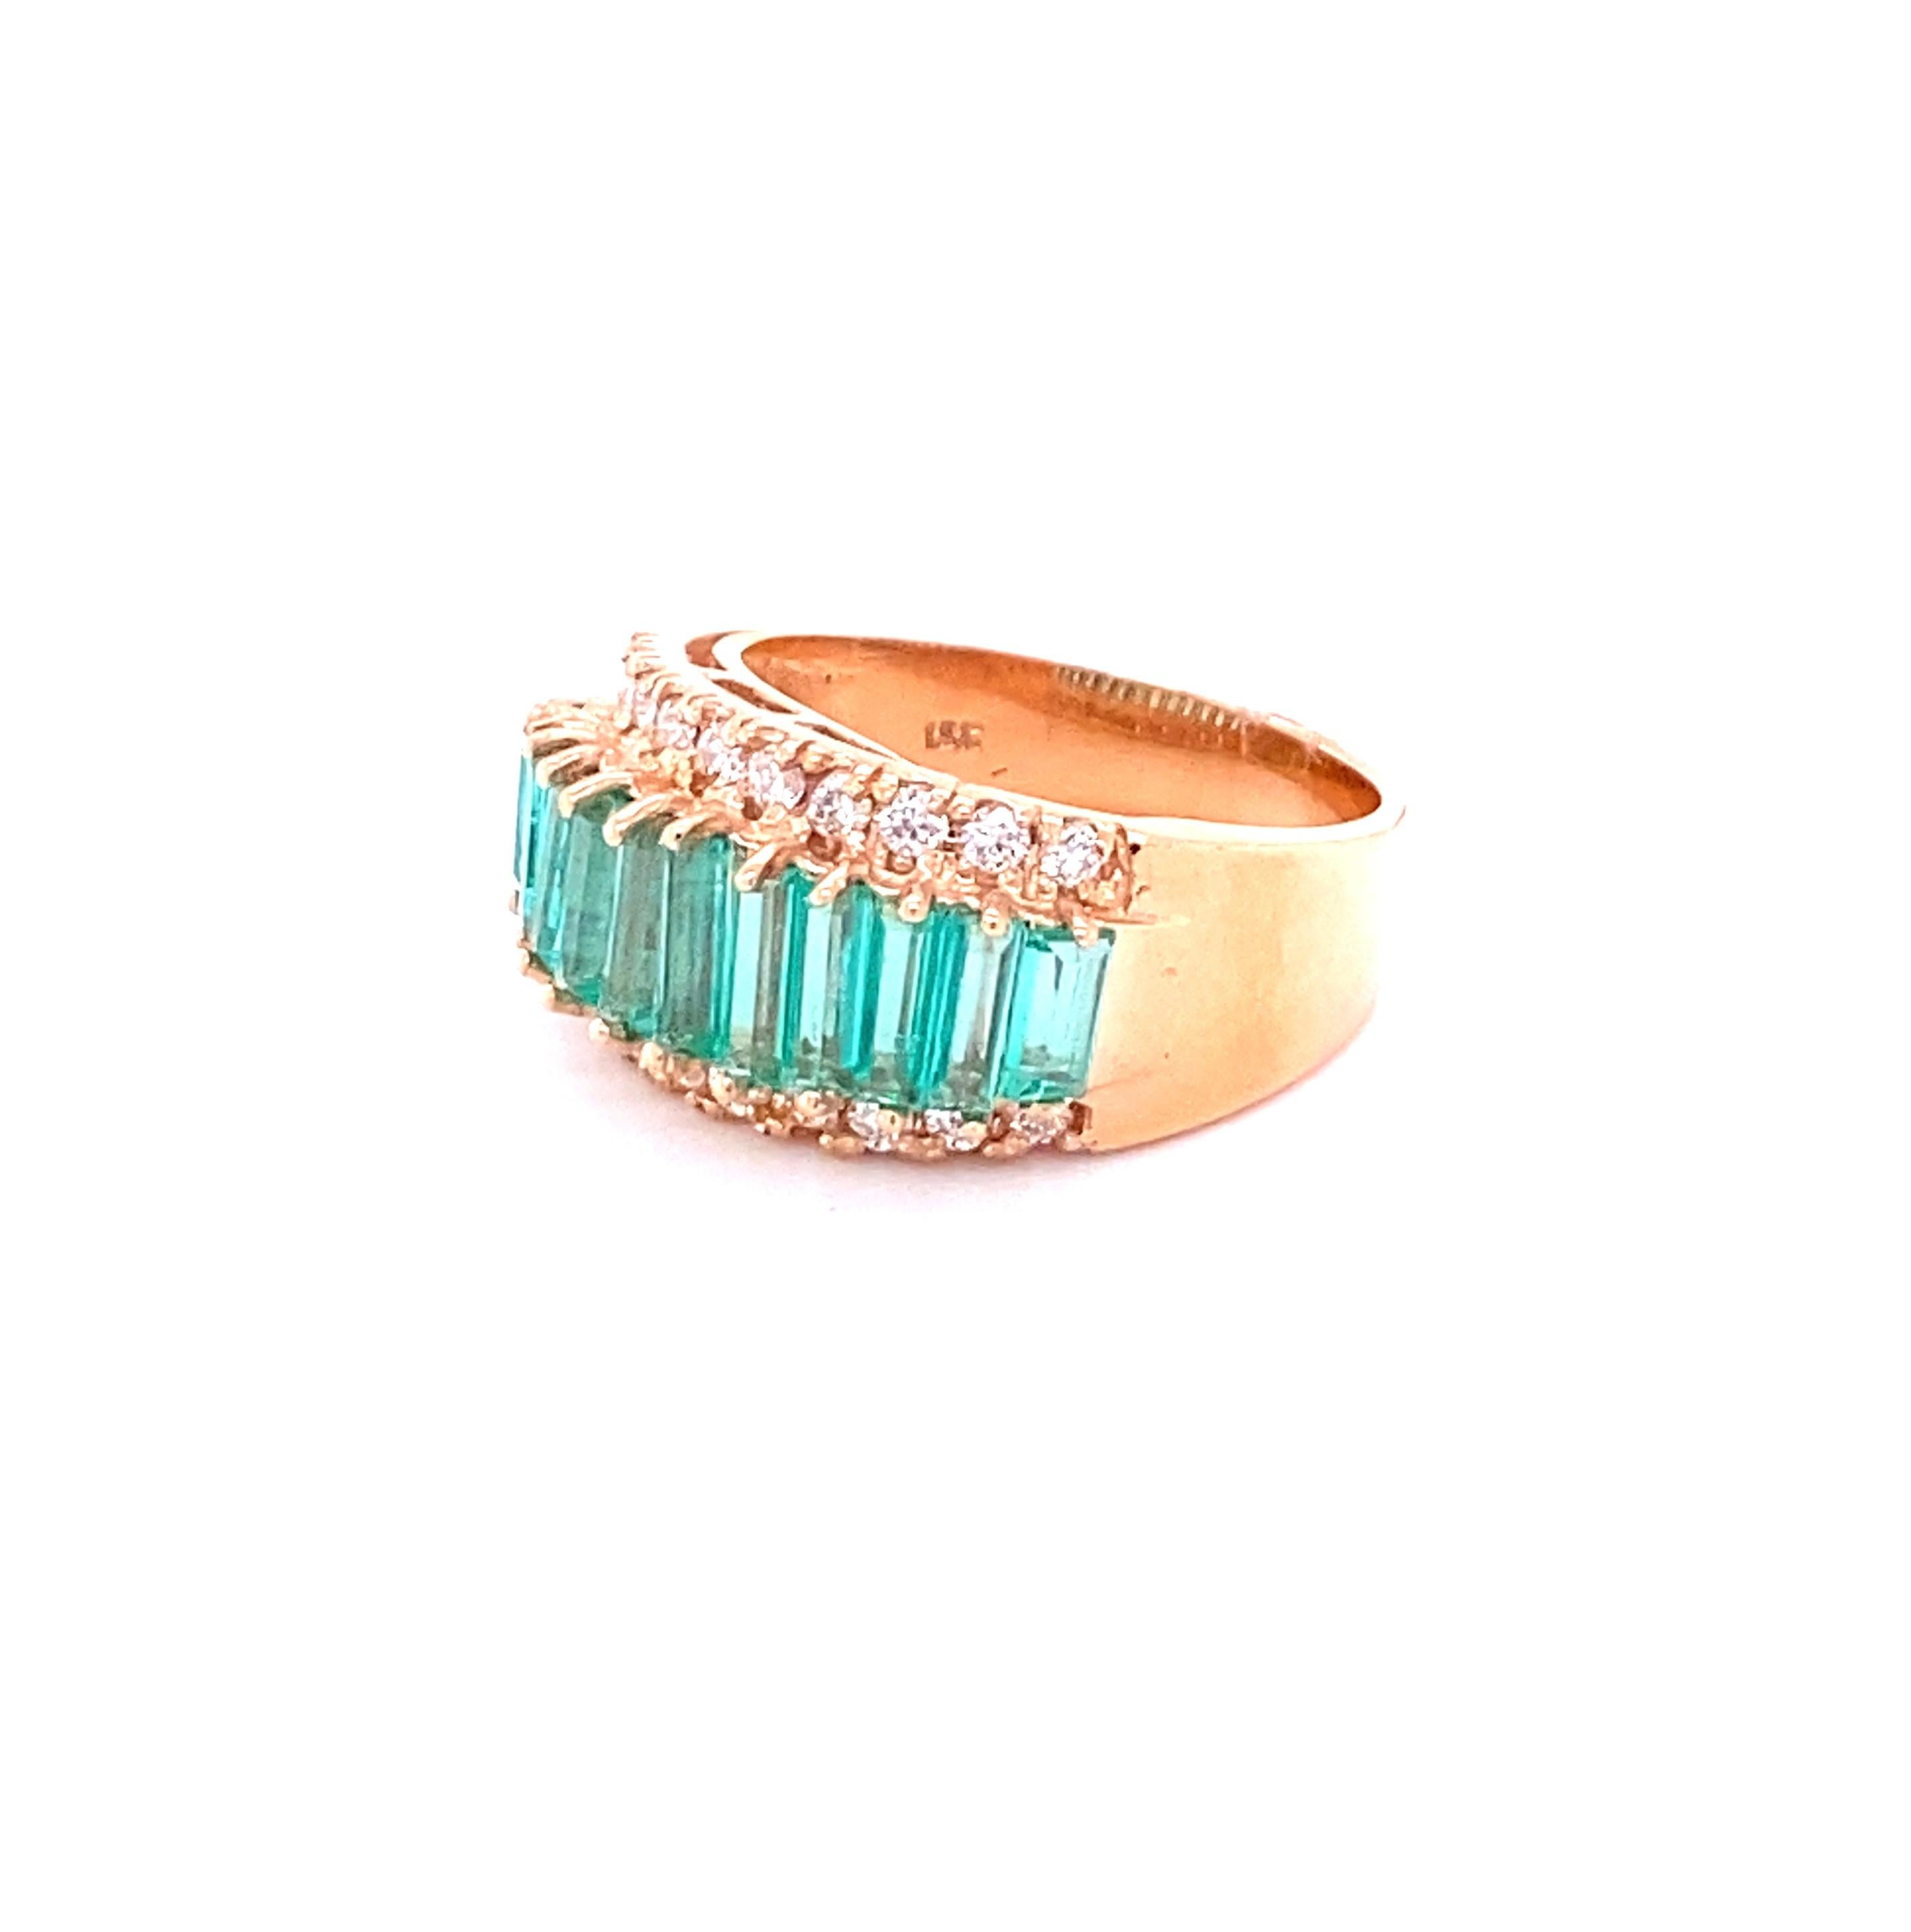 This ring has 11 Natural Baguette Cut Emeralds that weigh 2.12 carats as well as 22 Round Cut Diamonds that weigh 0.49 carats. (Clarity: VS, Color: H) 
The total carat weight of the ring is 2.61 carats.  

The ring is curated in 18 Karat Rose Gold